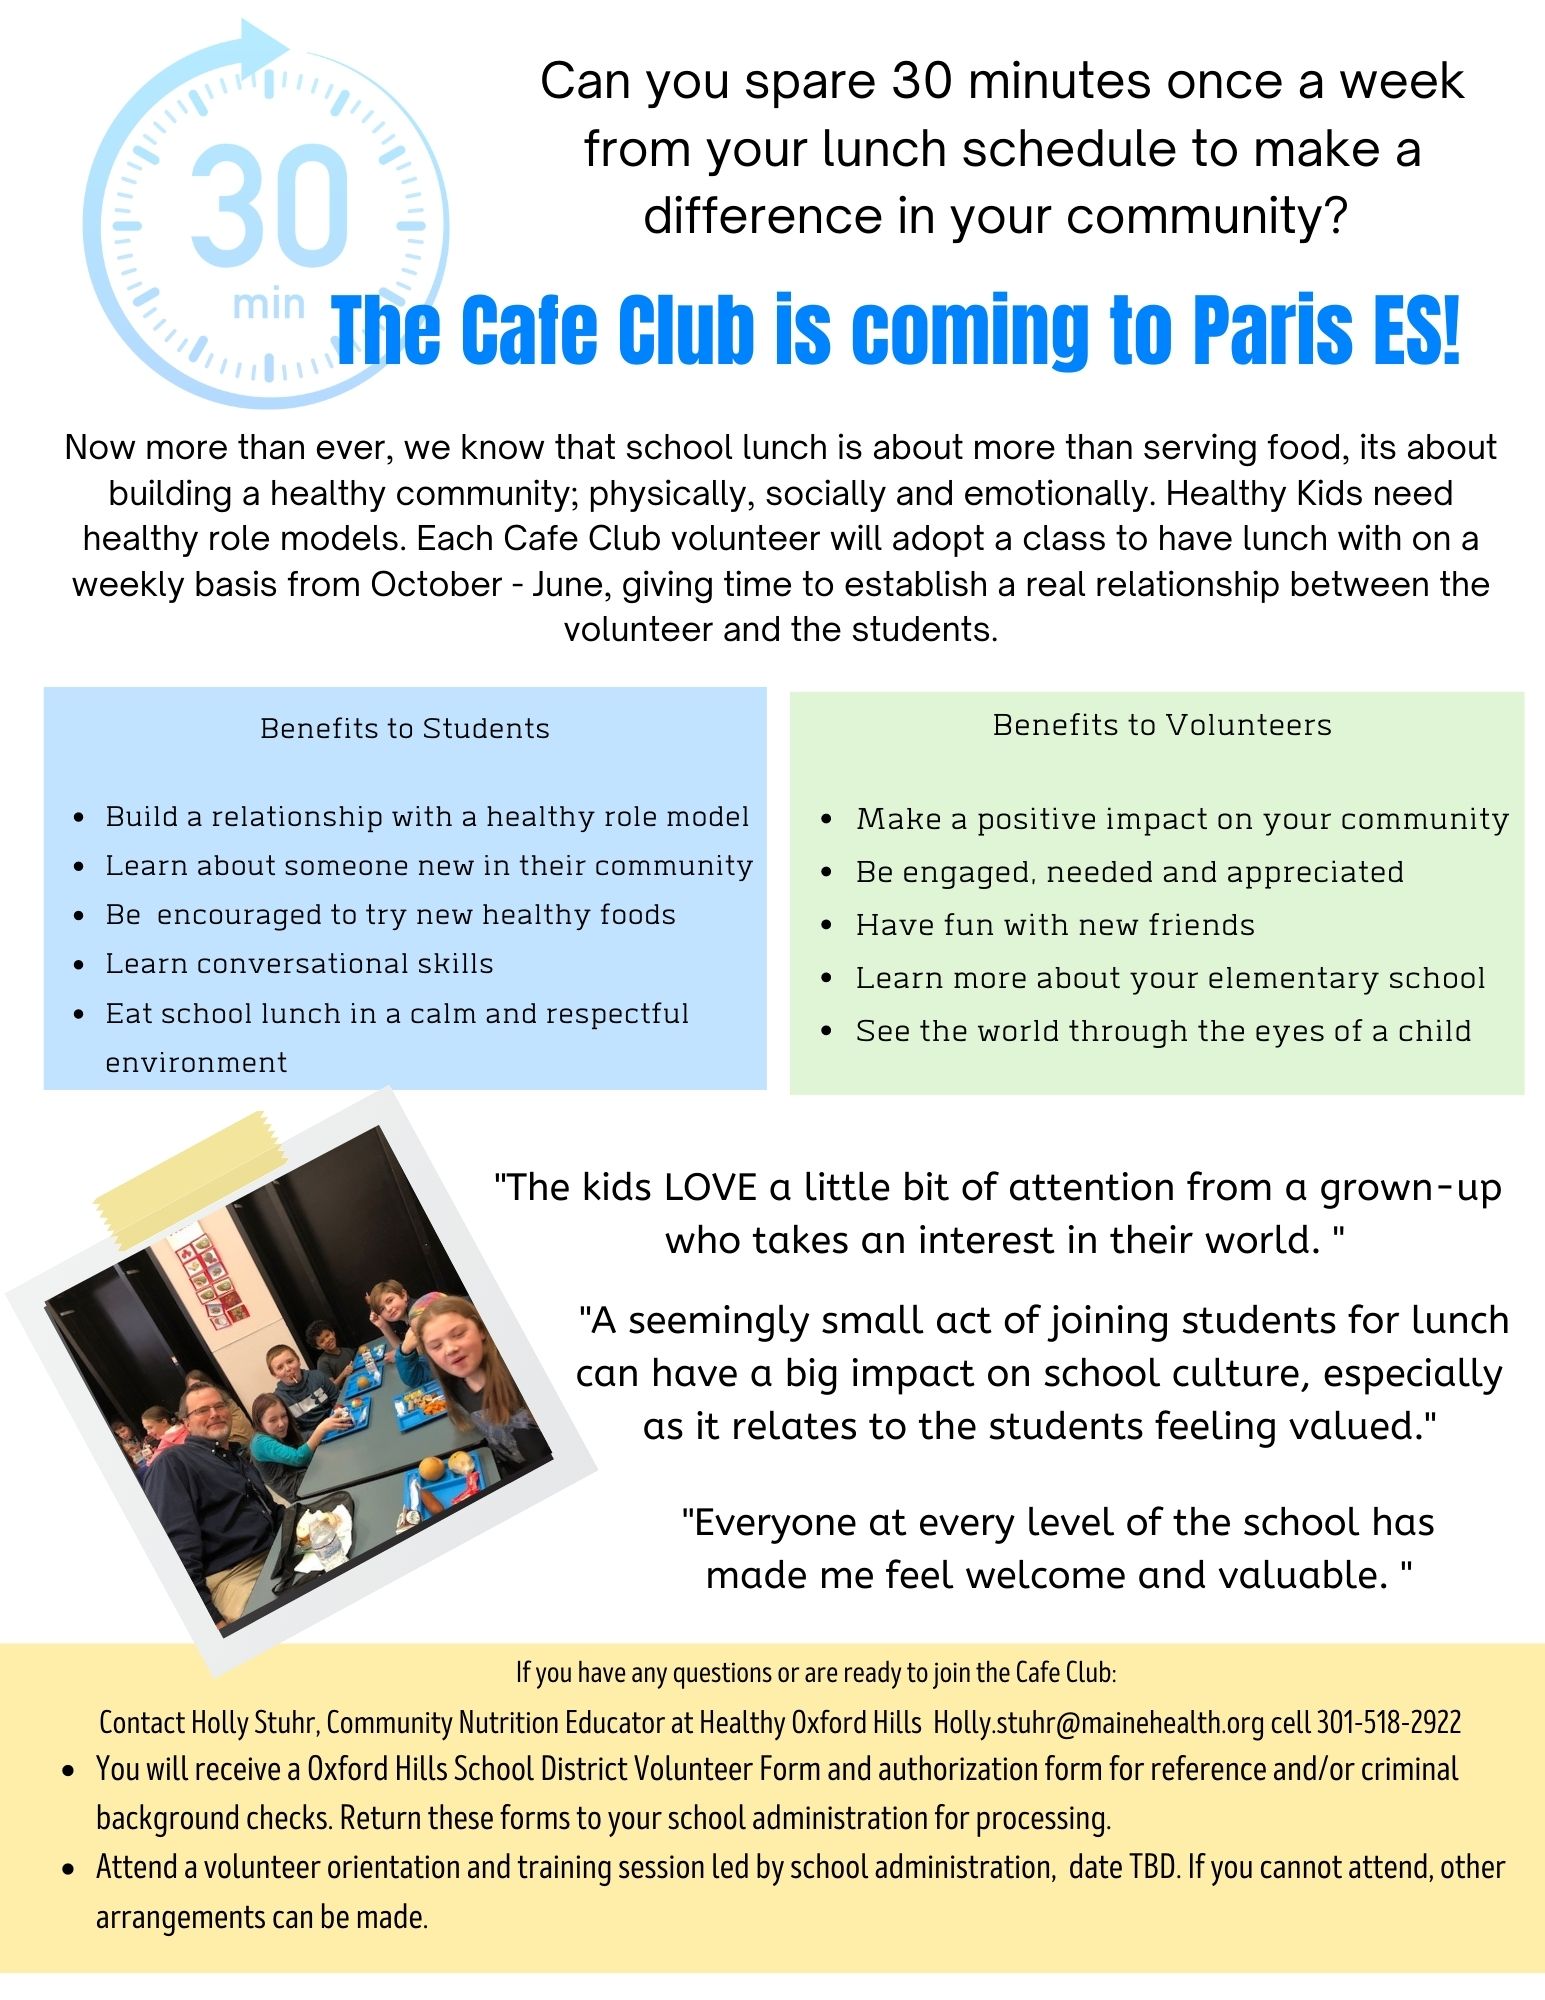 Cafe Club coming to Paris Elementary School